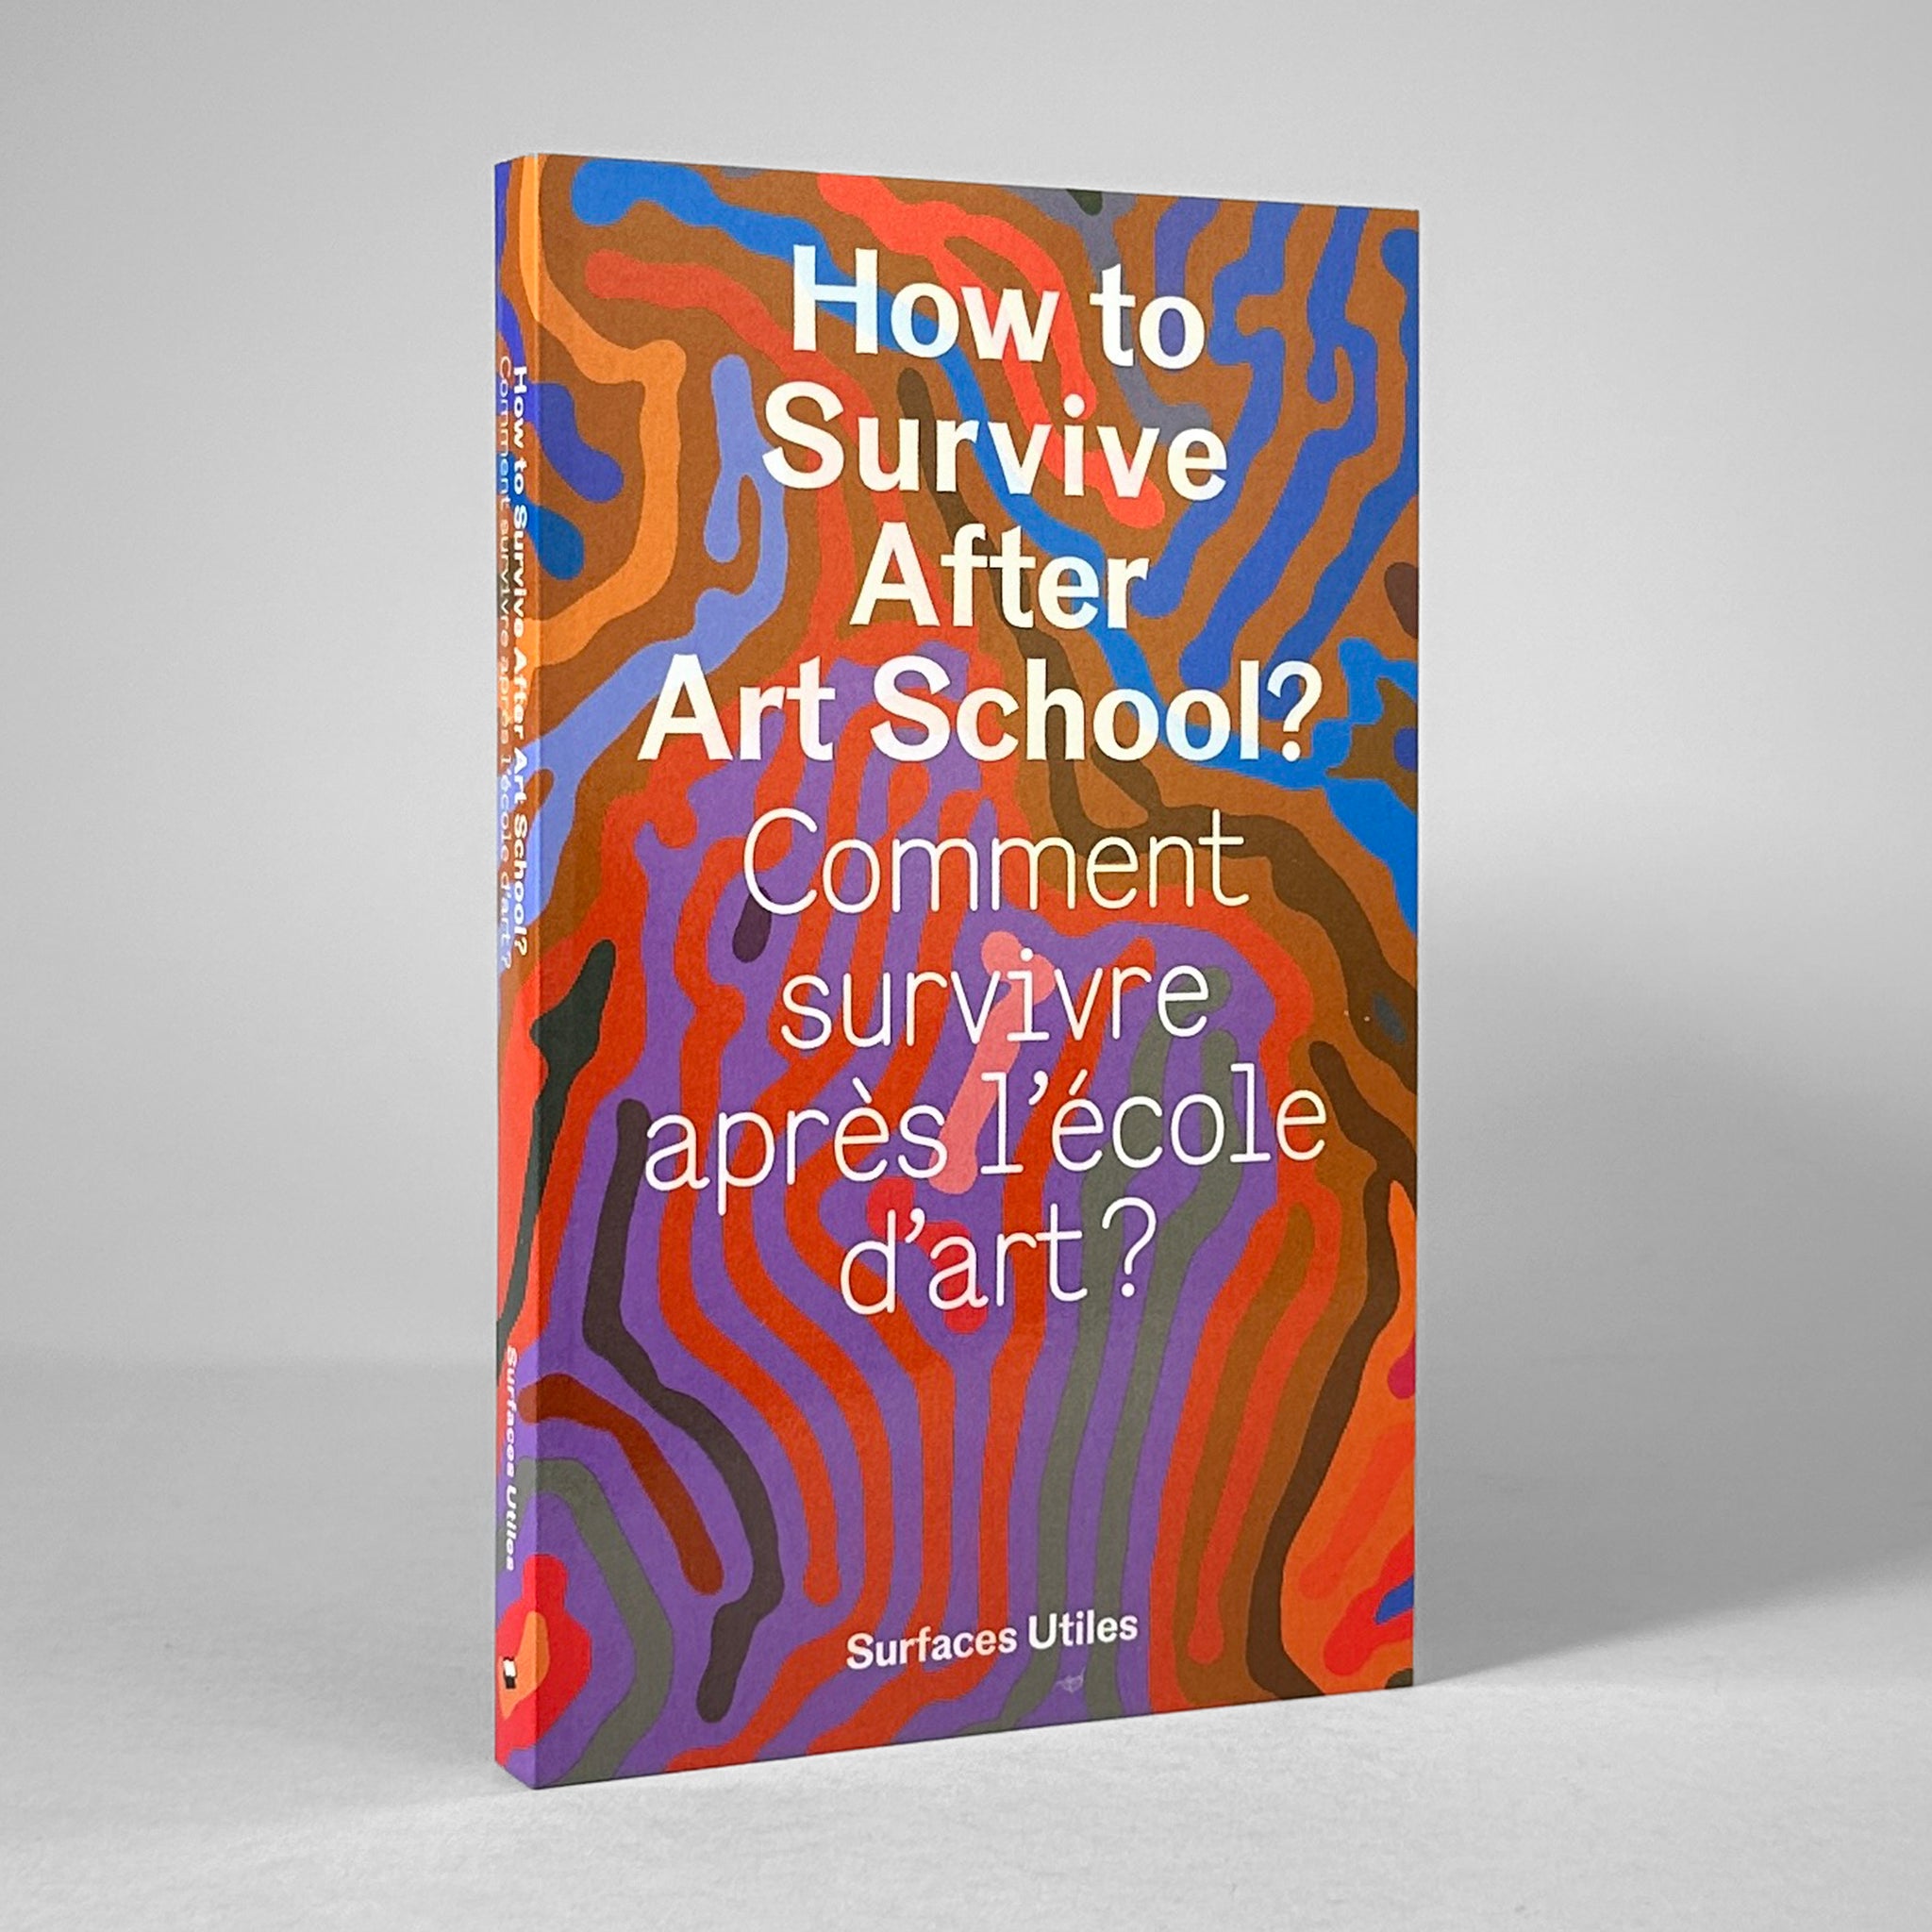 How to Survive After Art School